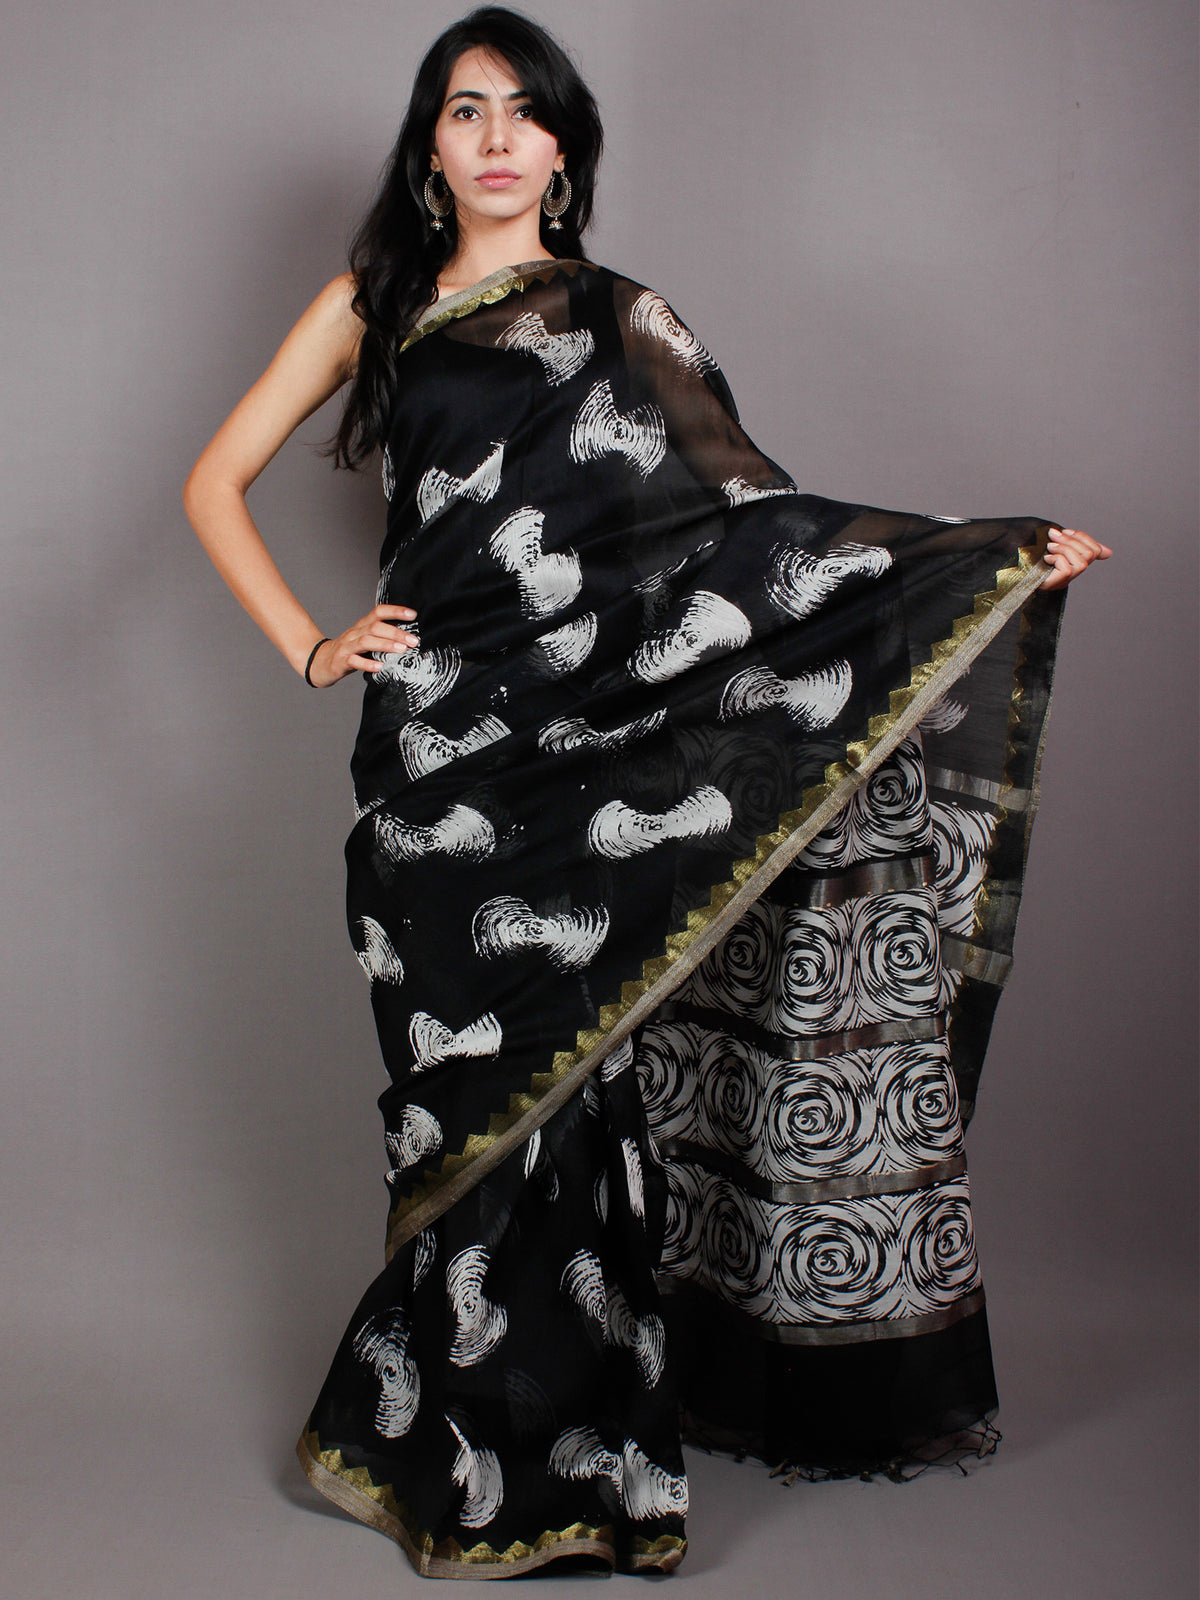 Black Ivory White Hand Block Printed in Natural Vegetable Colors Chanderi Saree With Geecha Border - S03170543